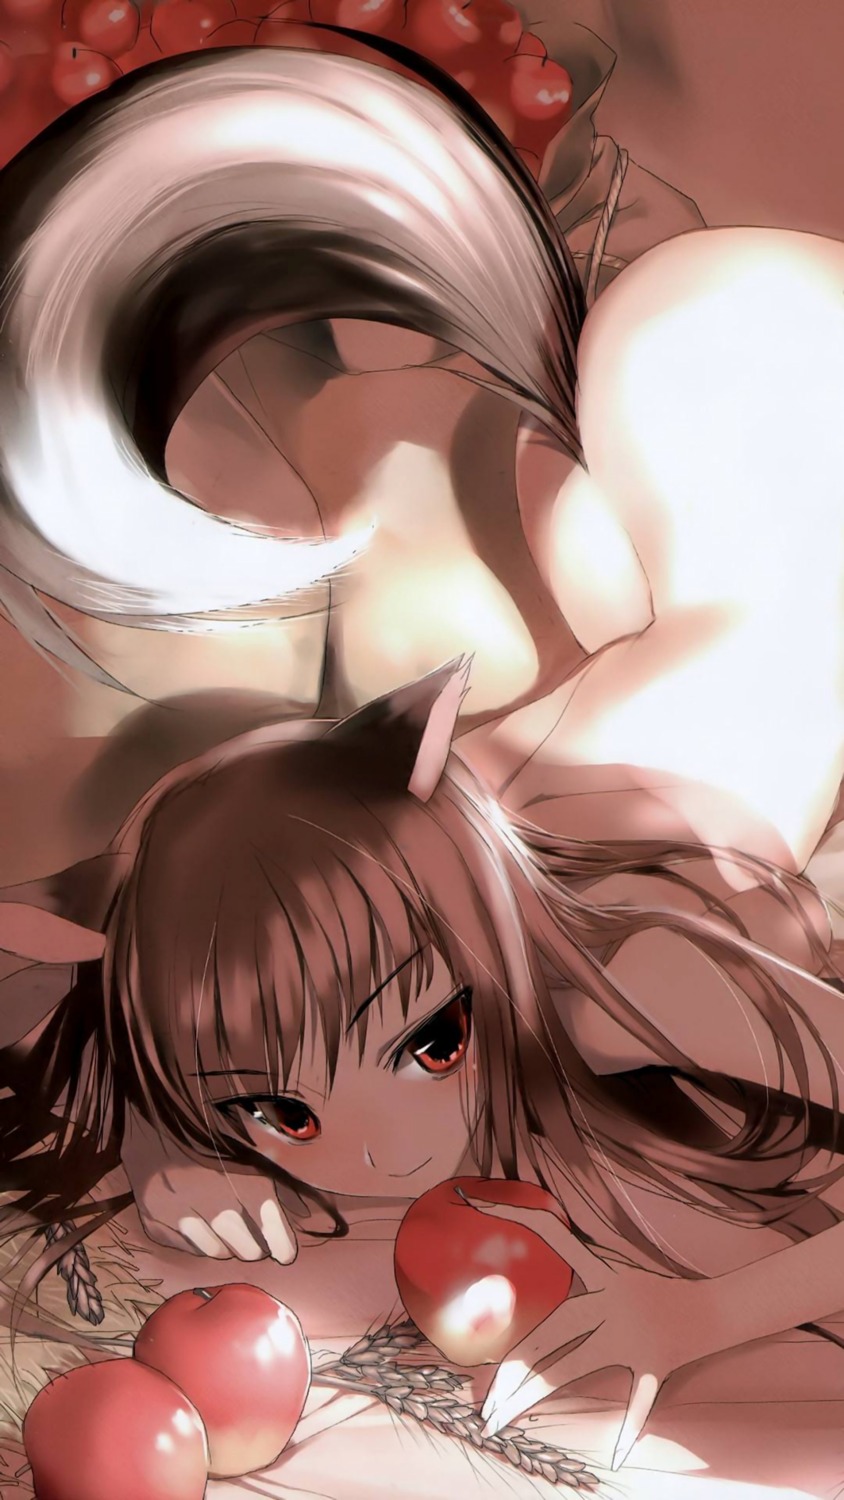 animal_ears hima holo naked spice_and_wolf tail